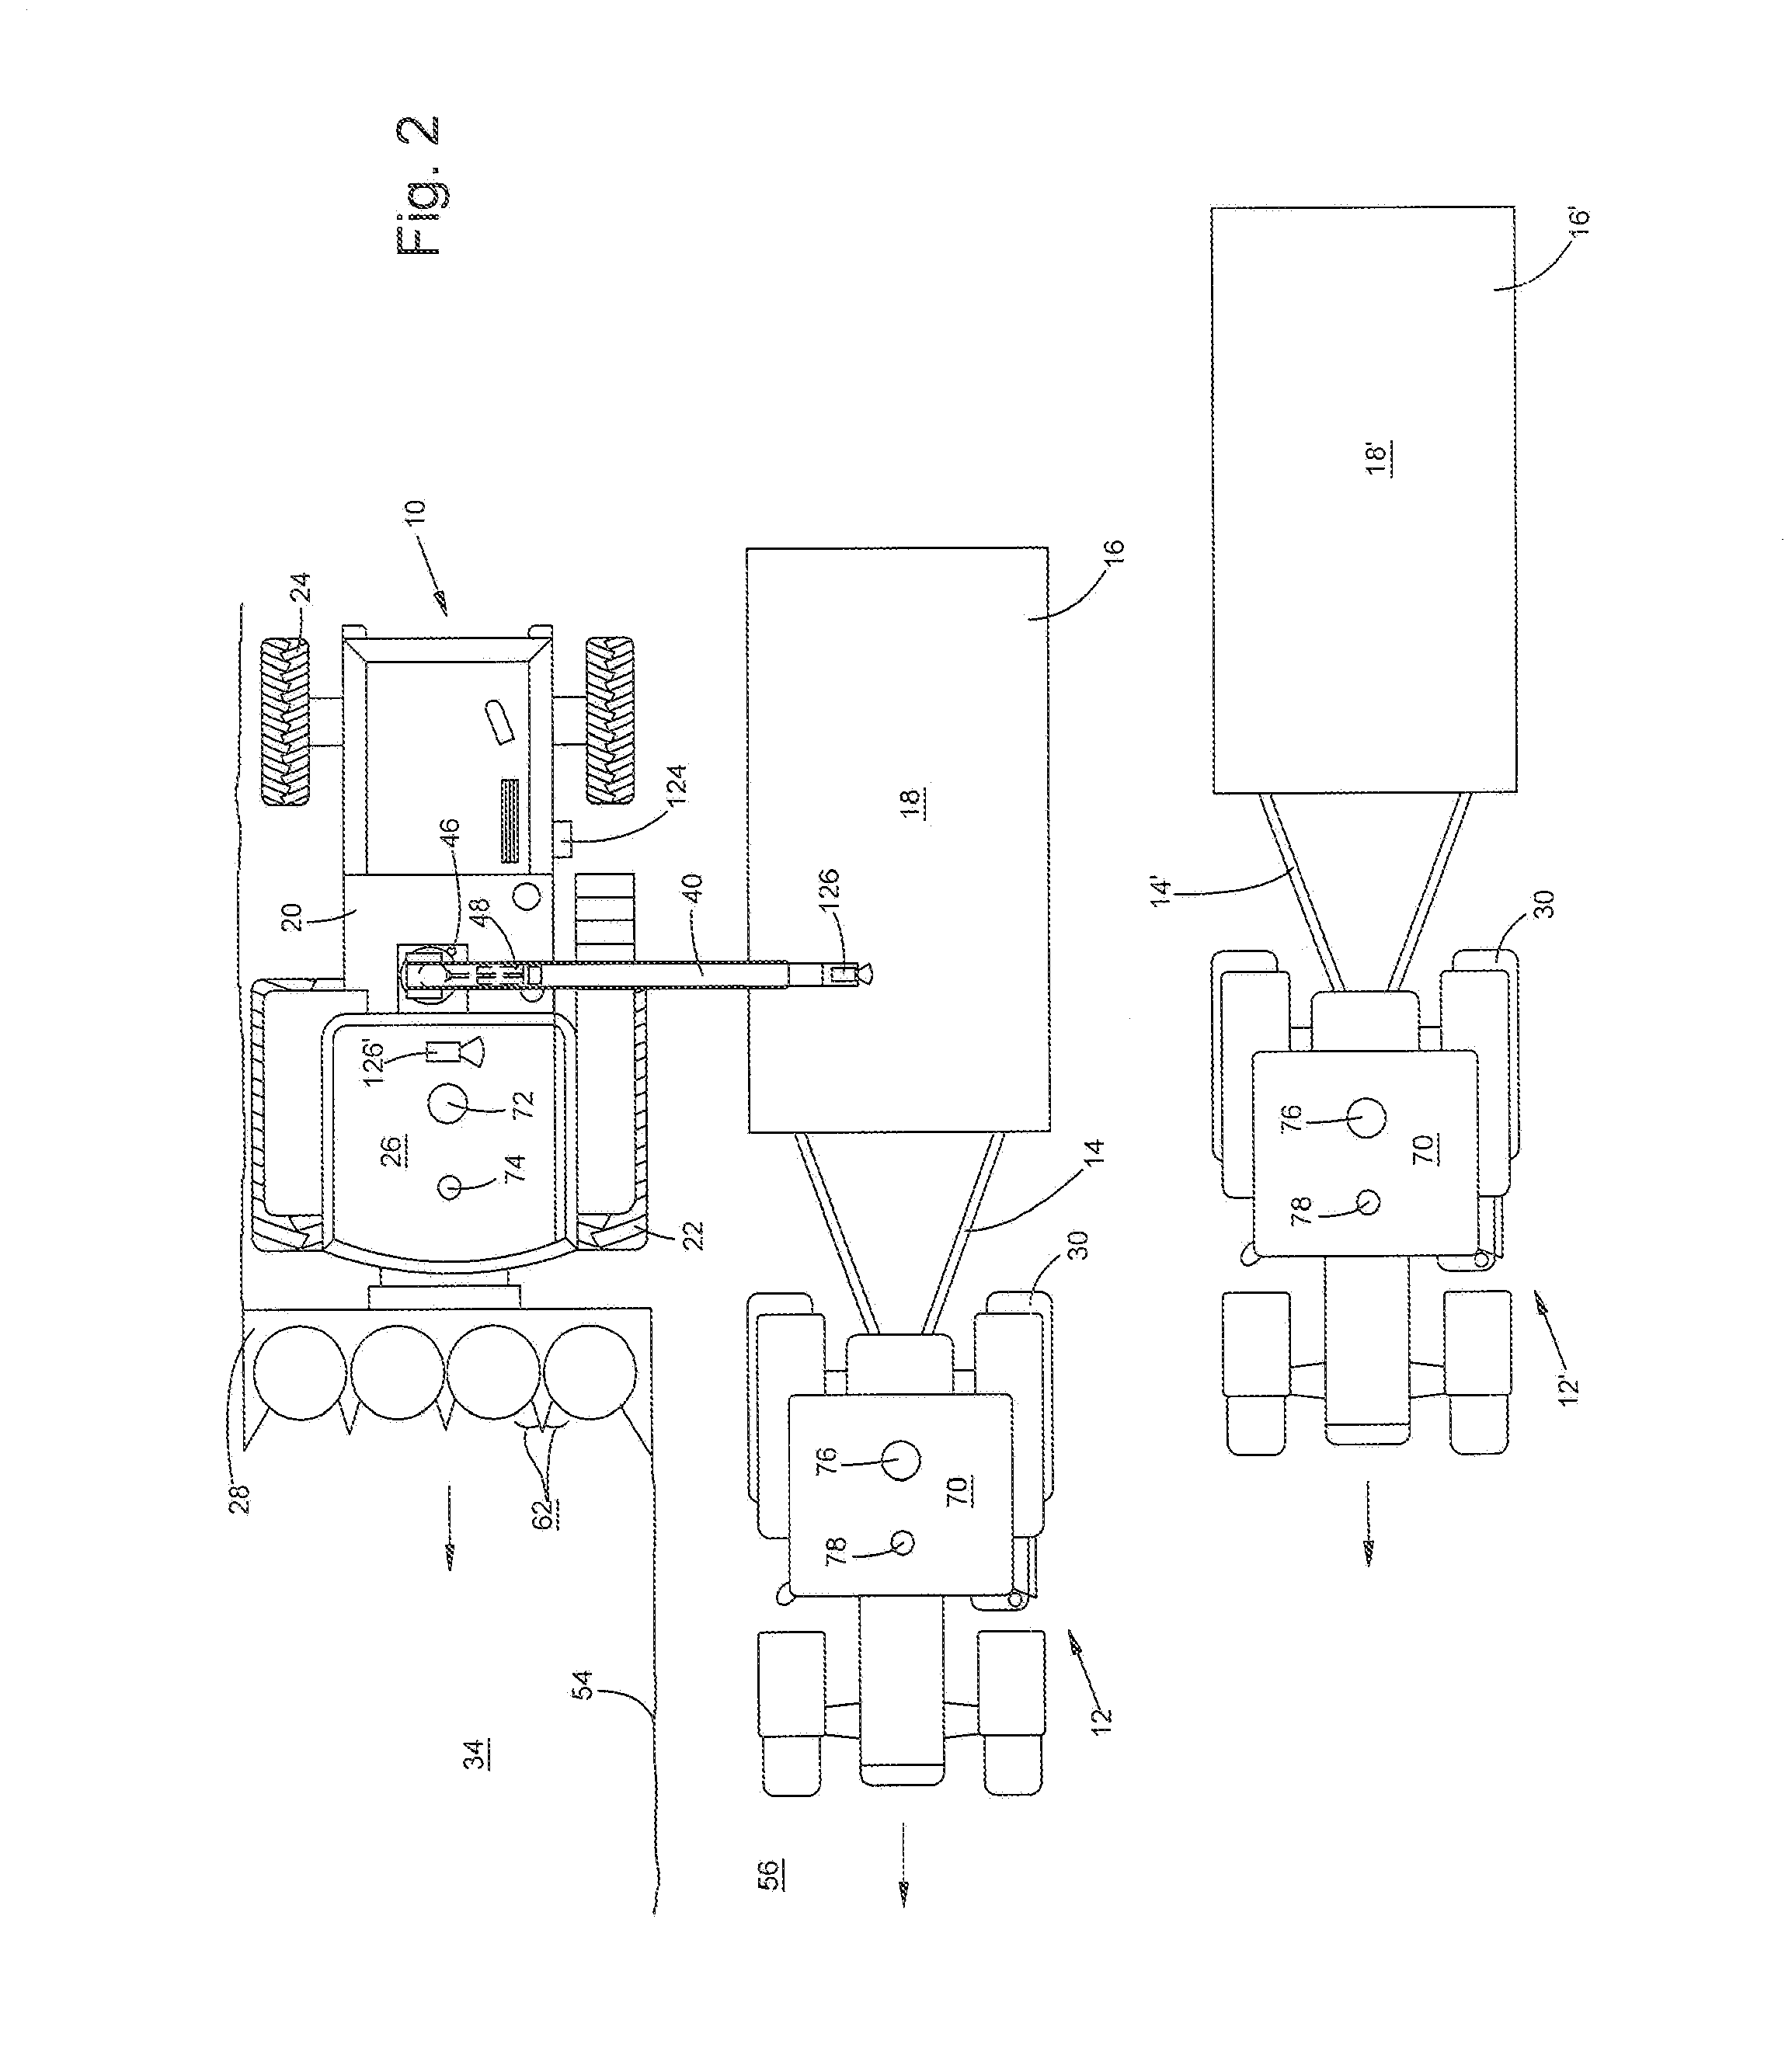 Control Arrangement For Controlling The Transfer Of Agricultural Crop From A Harvesting Machine To A Transport Vehicle